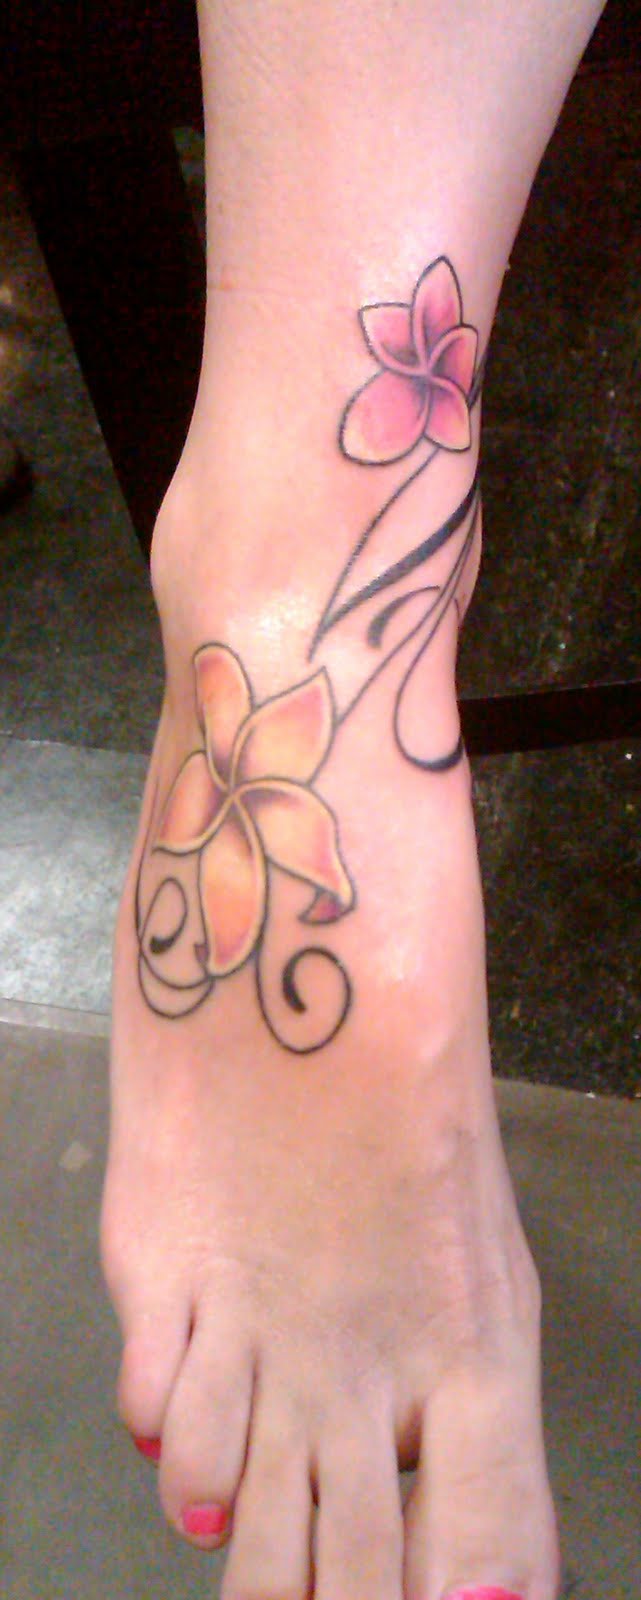 2011 Exclusive Tattoo Designs on Foot For Girls